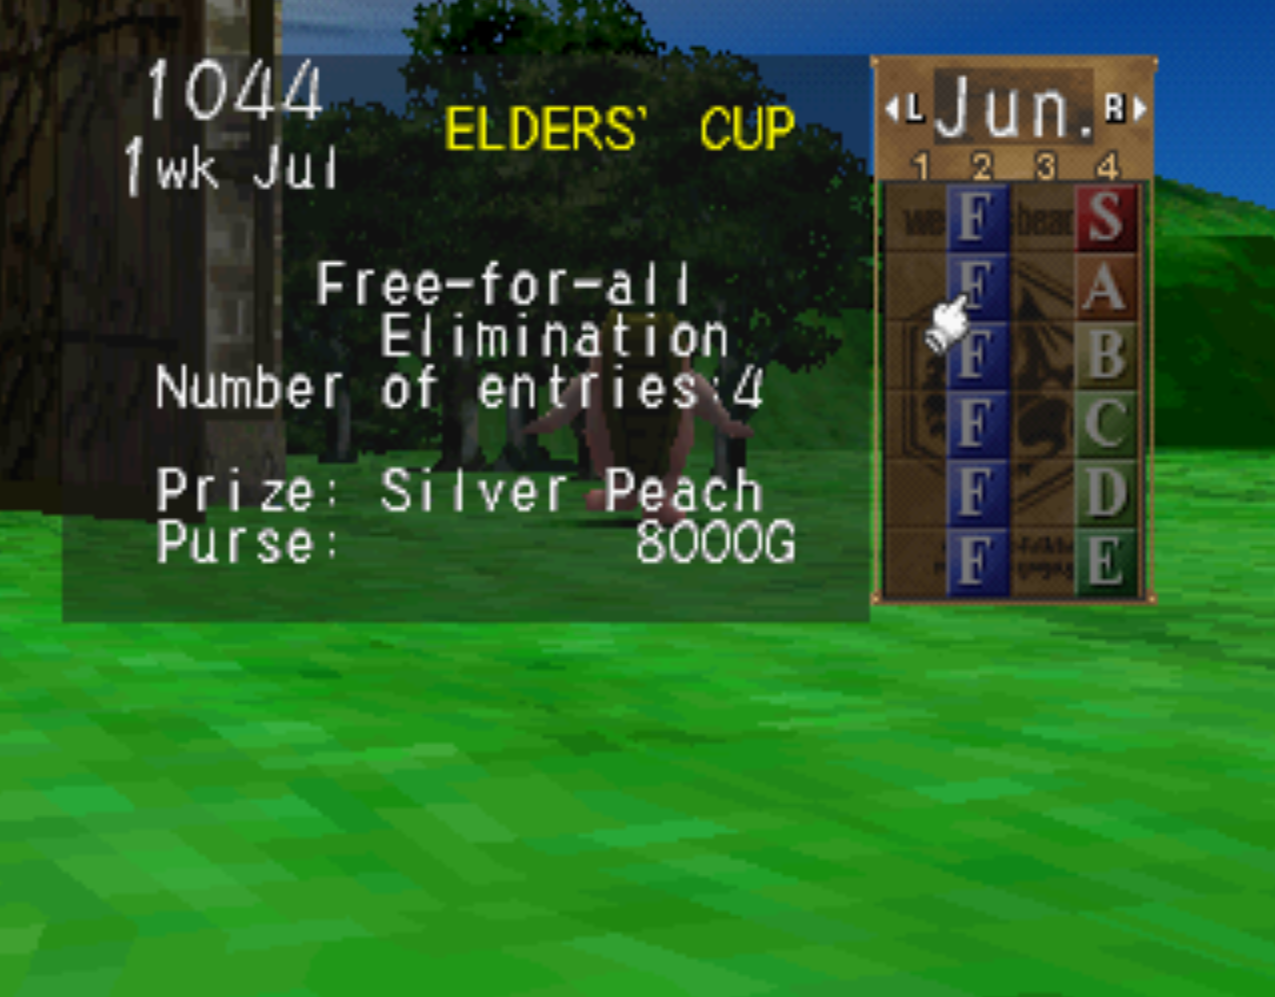 Elders Cup for Silver Peach